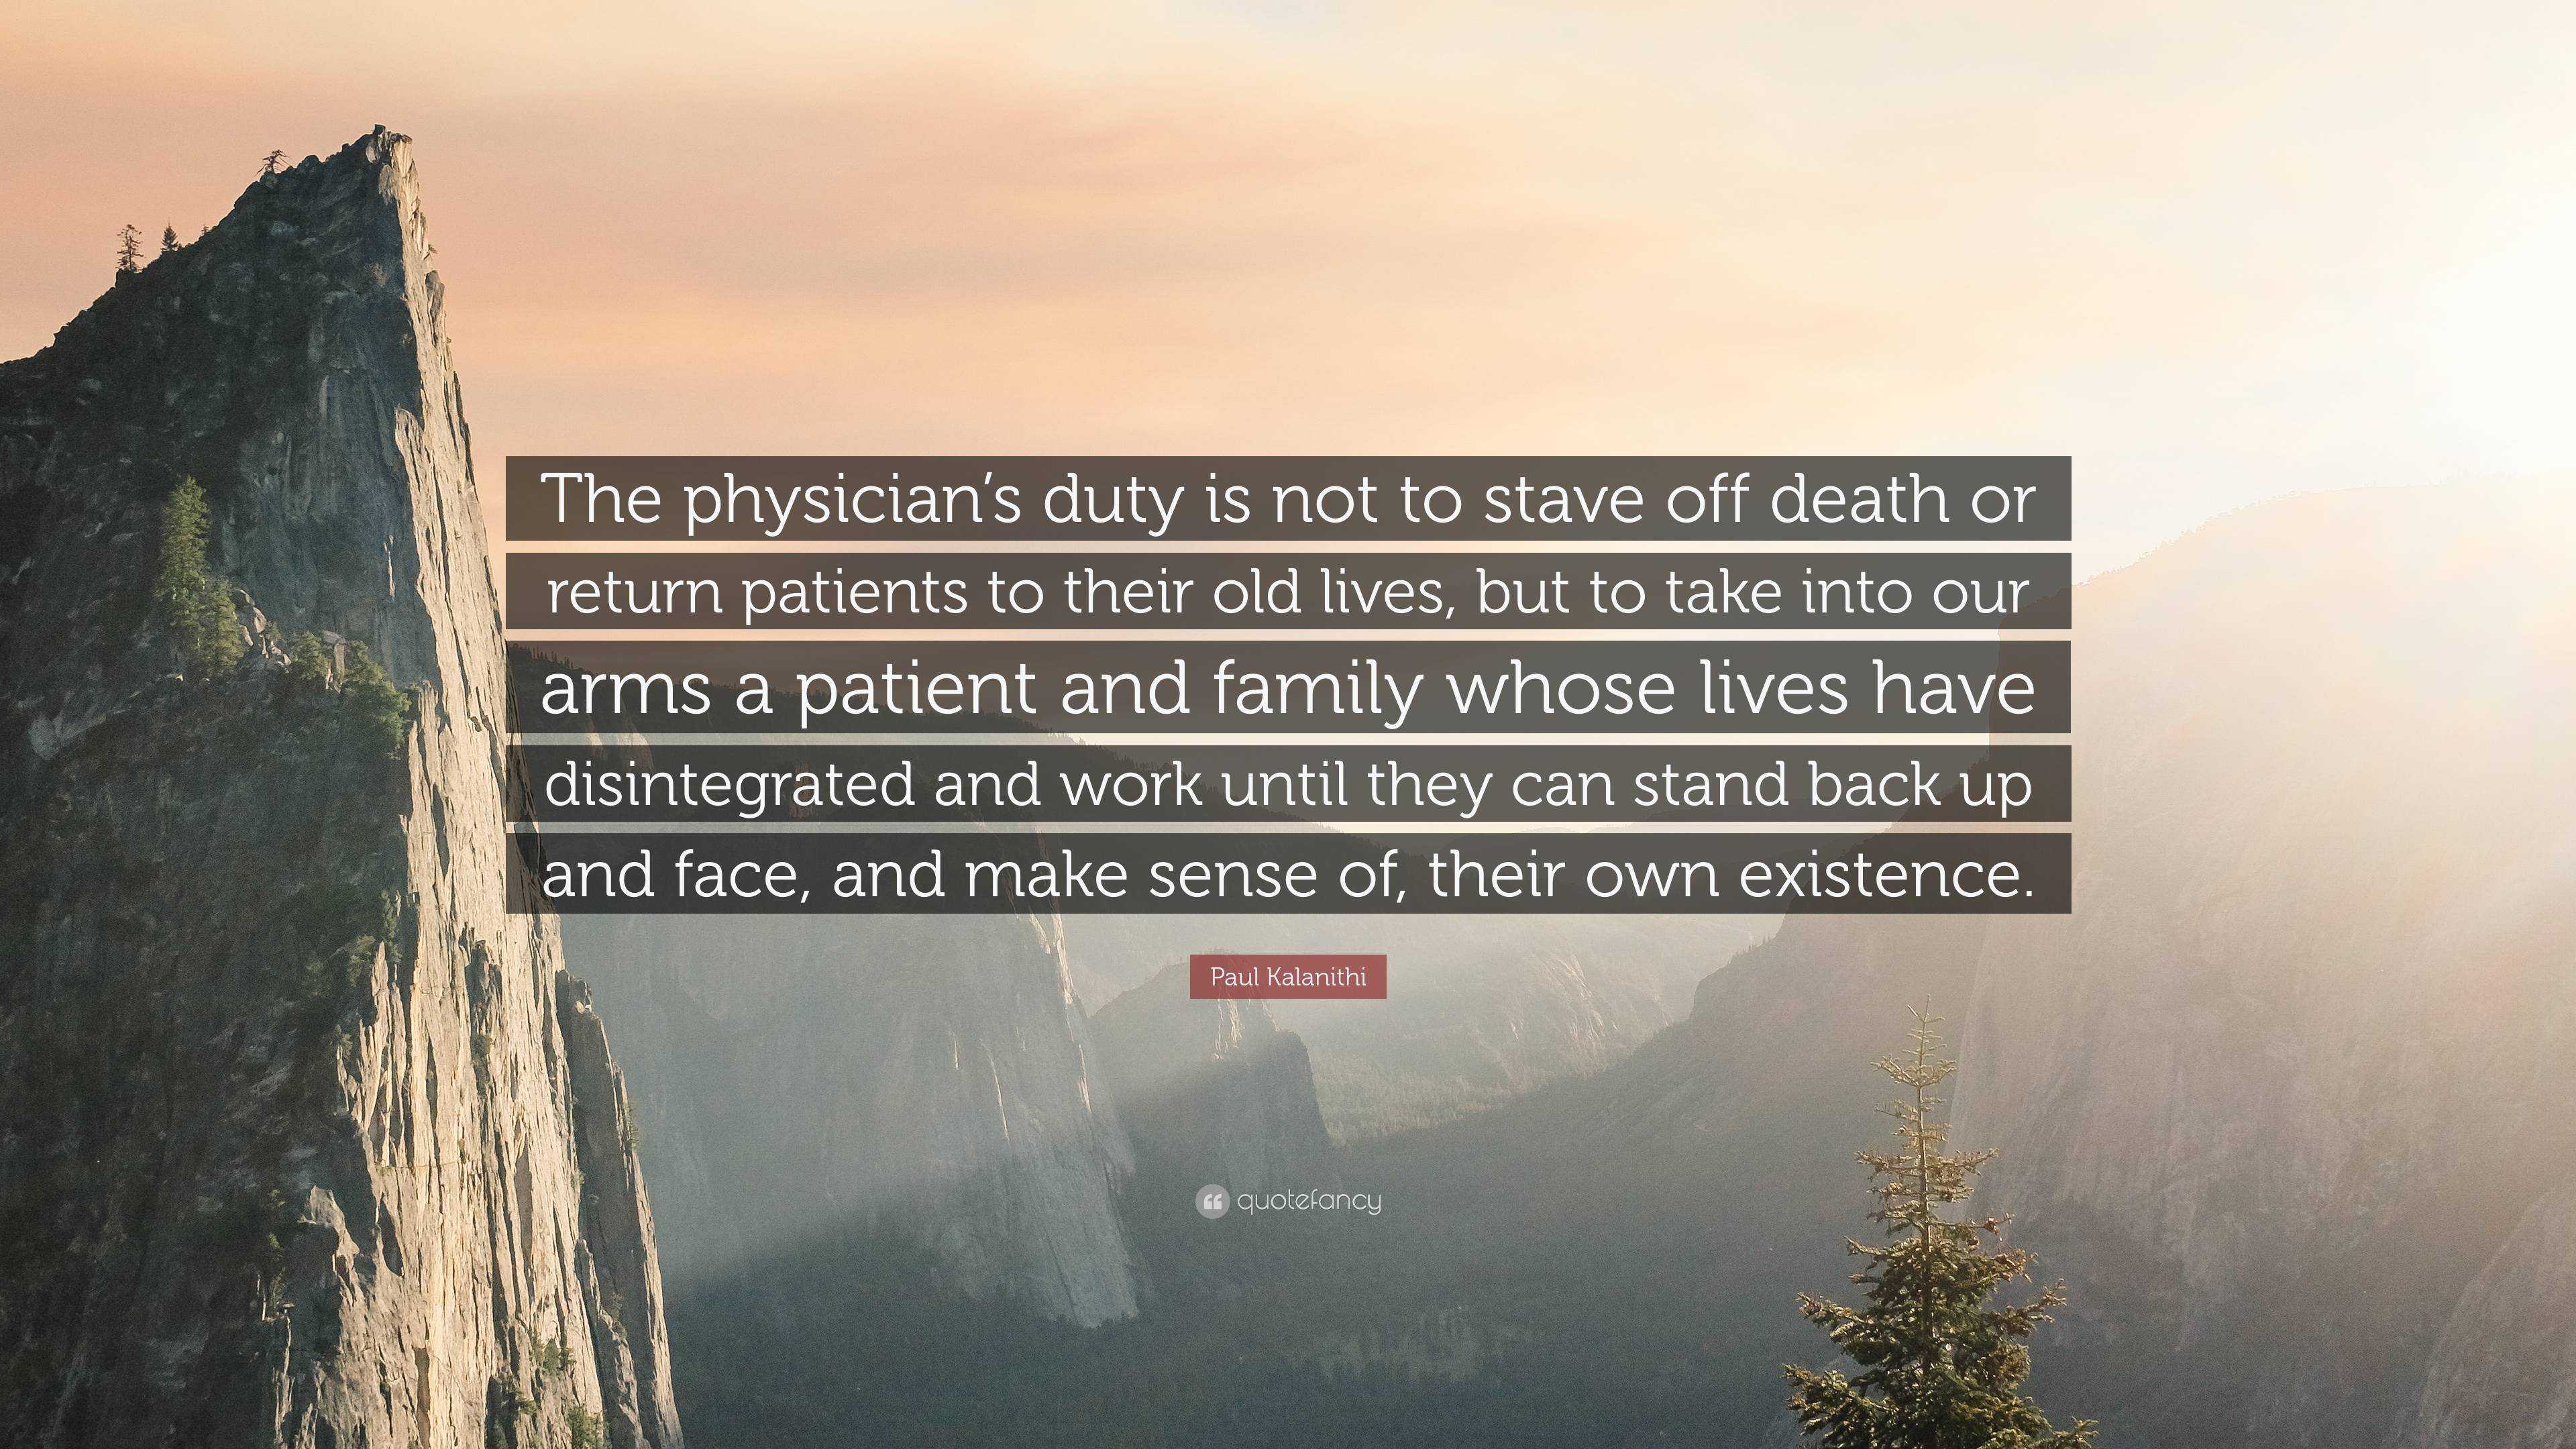 Paul Kalanithi Quote: “The physician’s duty is not to stave off death